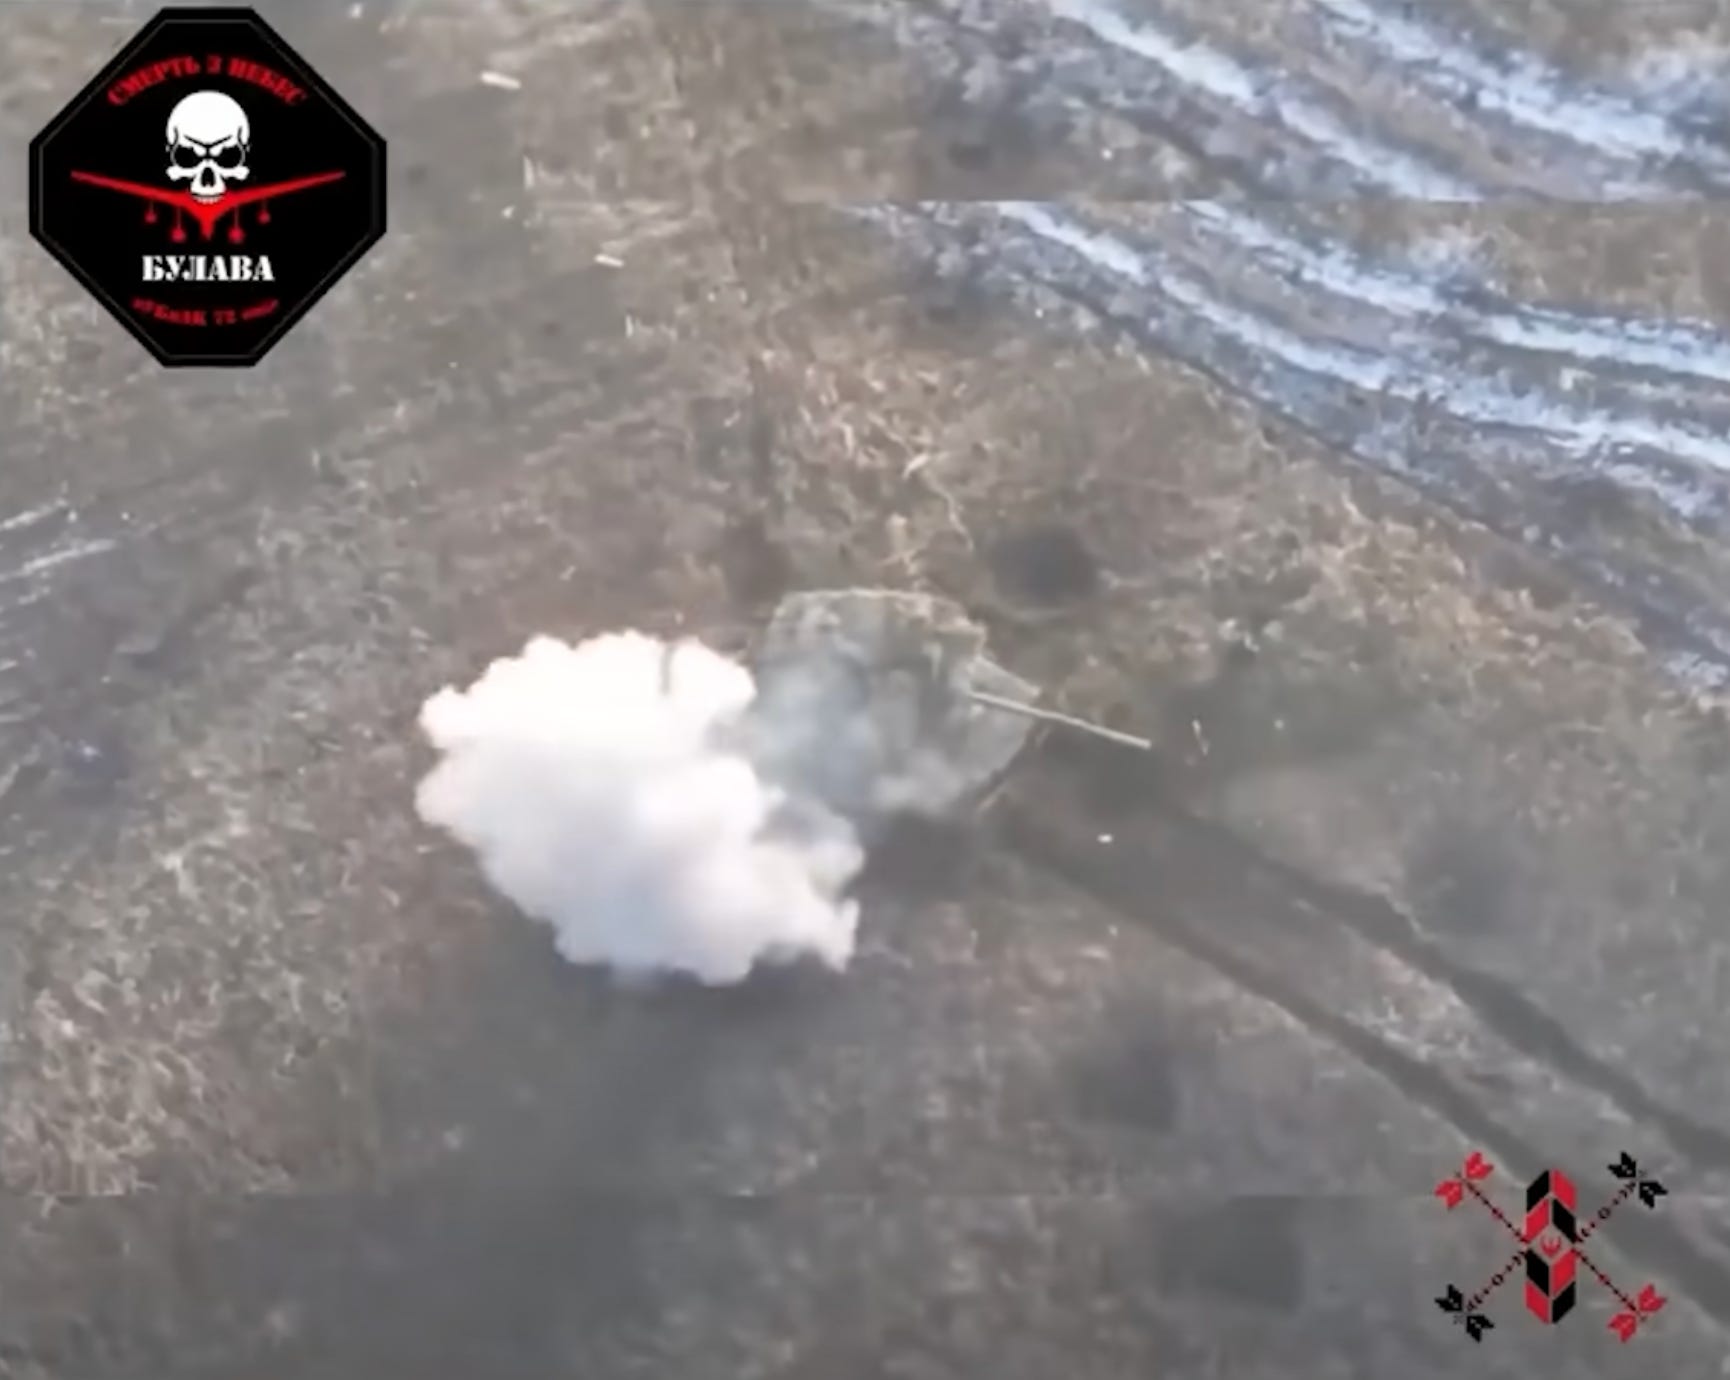 kremlin supporters are fuming after footage appears to show ukrainian drones blowing up a russian armored column